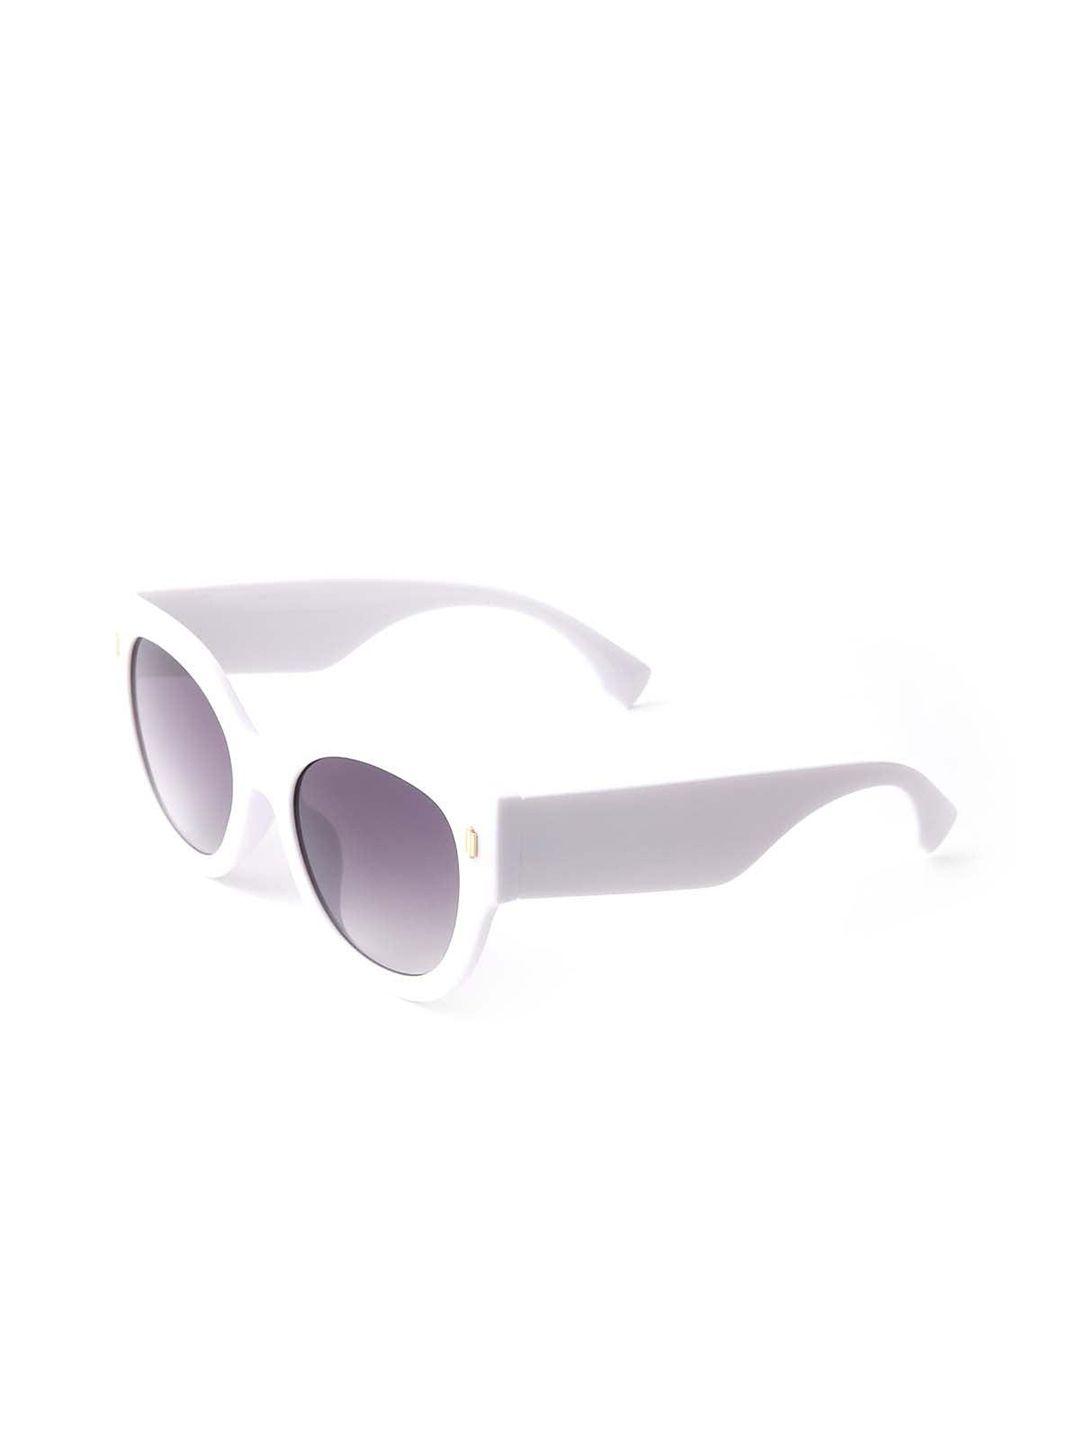 odette women cateye sunglasses with uv protected lens